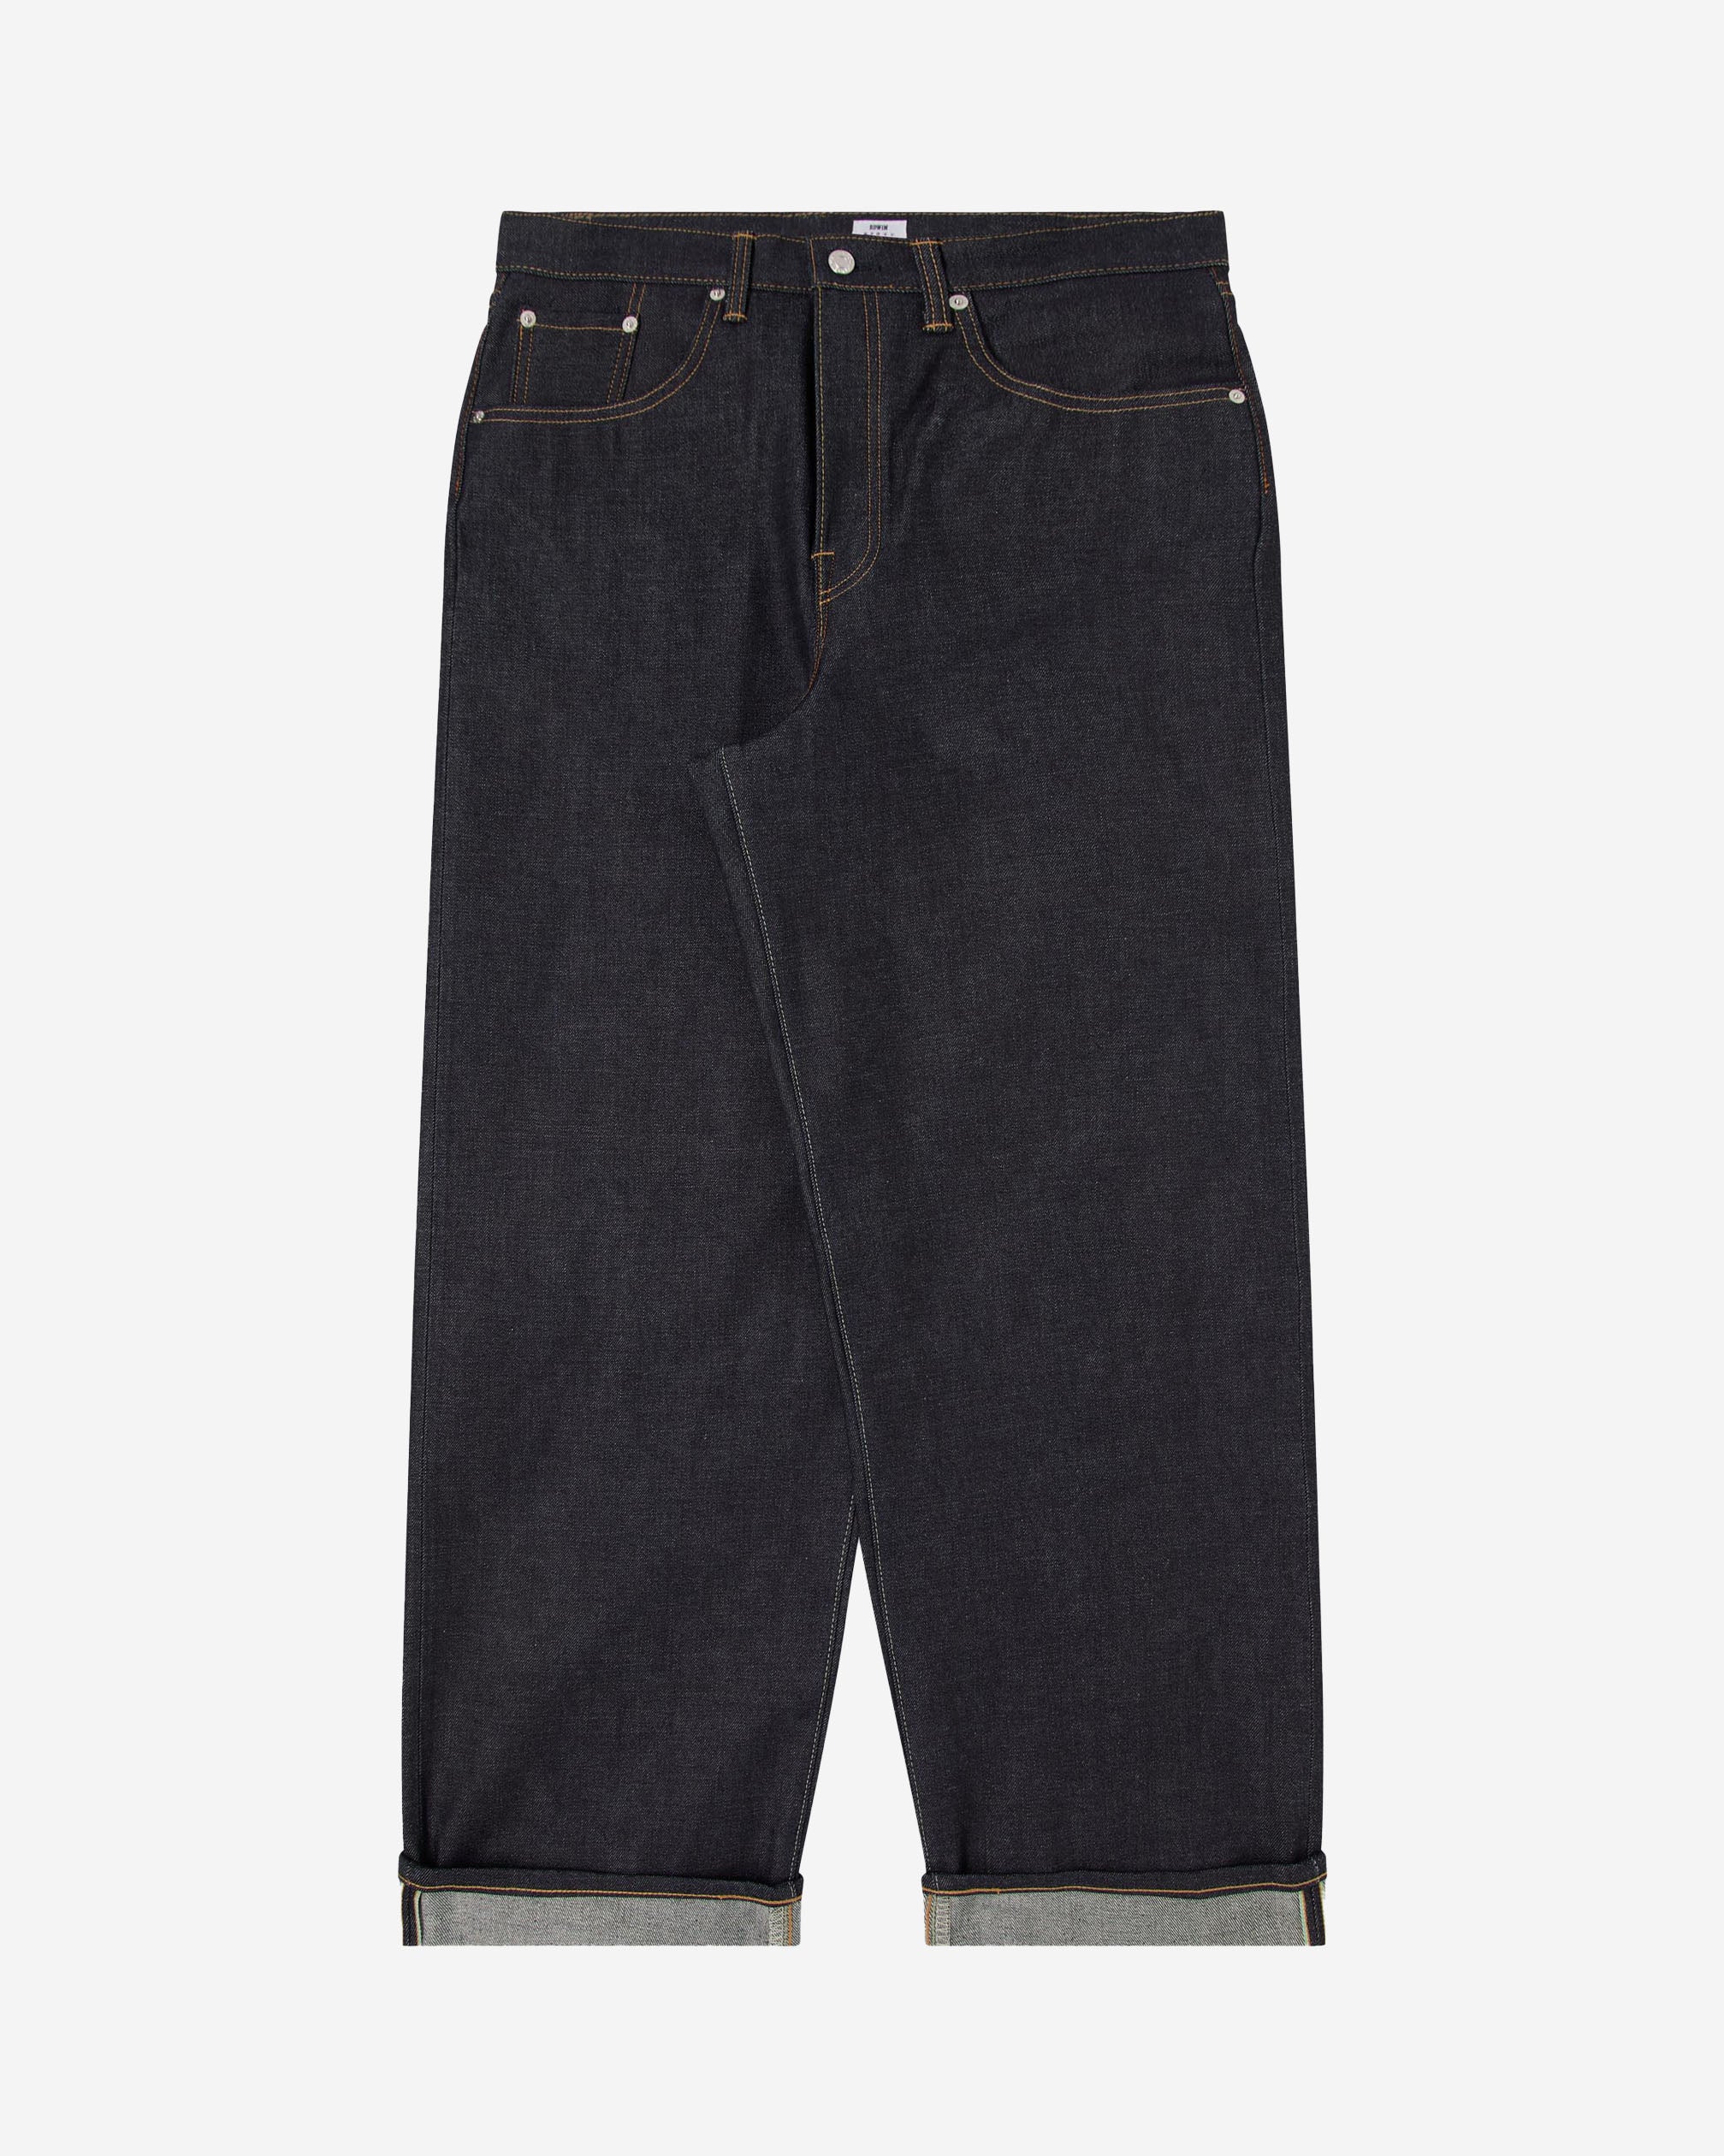 The 'Made in Japan' Collection offers a unique product with no direct competition in terms of quality, price point and a ‘Made in Japan’ provenance. Accommodating the more traditional aspects of the premium Japanese denim collection, the EDWIN Wide Pant is made from a 13.5oz Kaihara Dark Pure Indigo Rainbow Selvage Denim. 13,5oz Kaihara Dark Pure Indigo Rainbow Selvage Denim 100% Cotton Oversized Fit Blue Unwashed Mid / High rise 5-Pocket Denim Button Closure Made in Japan